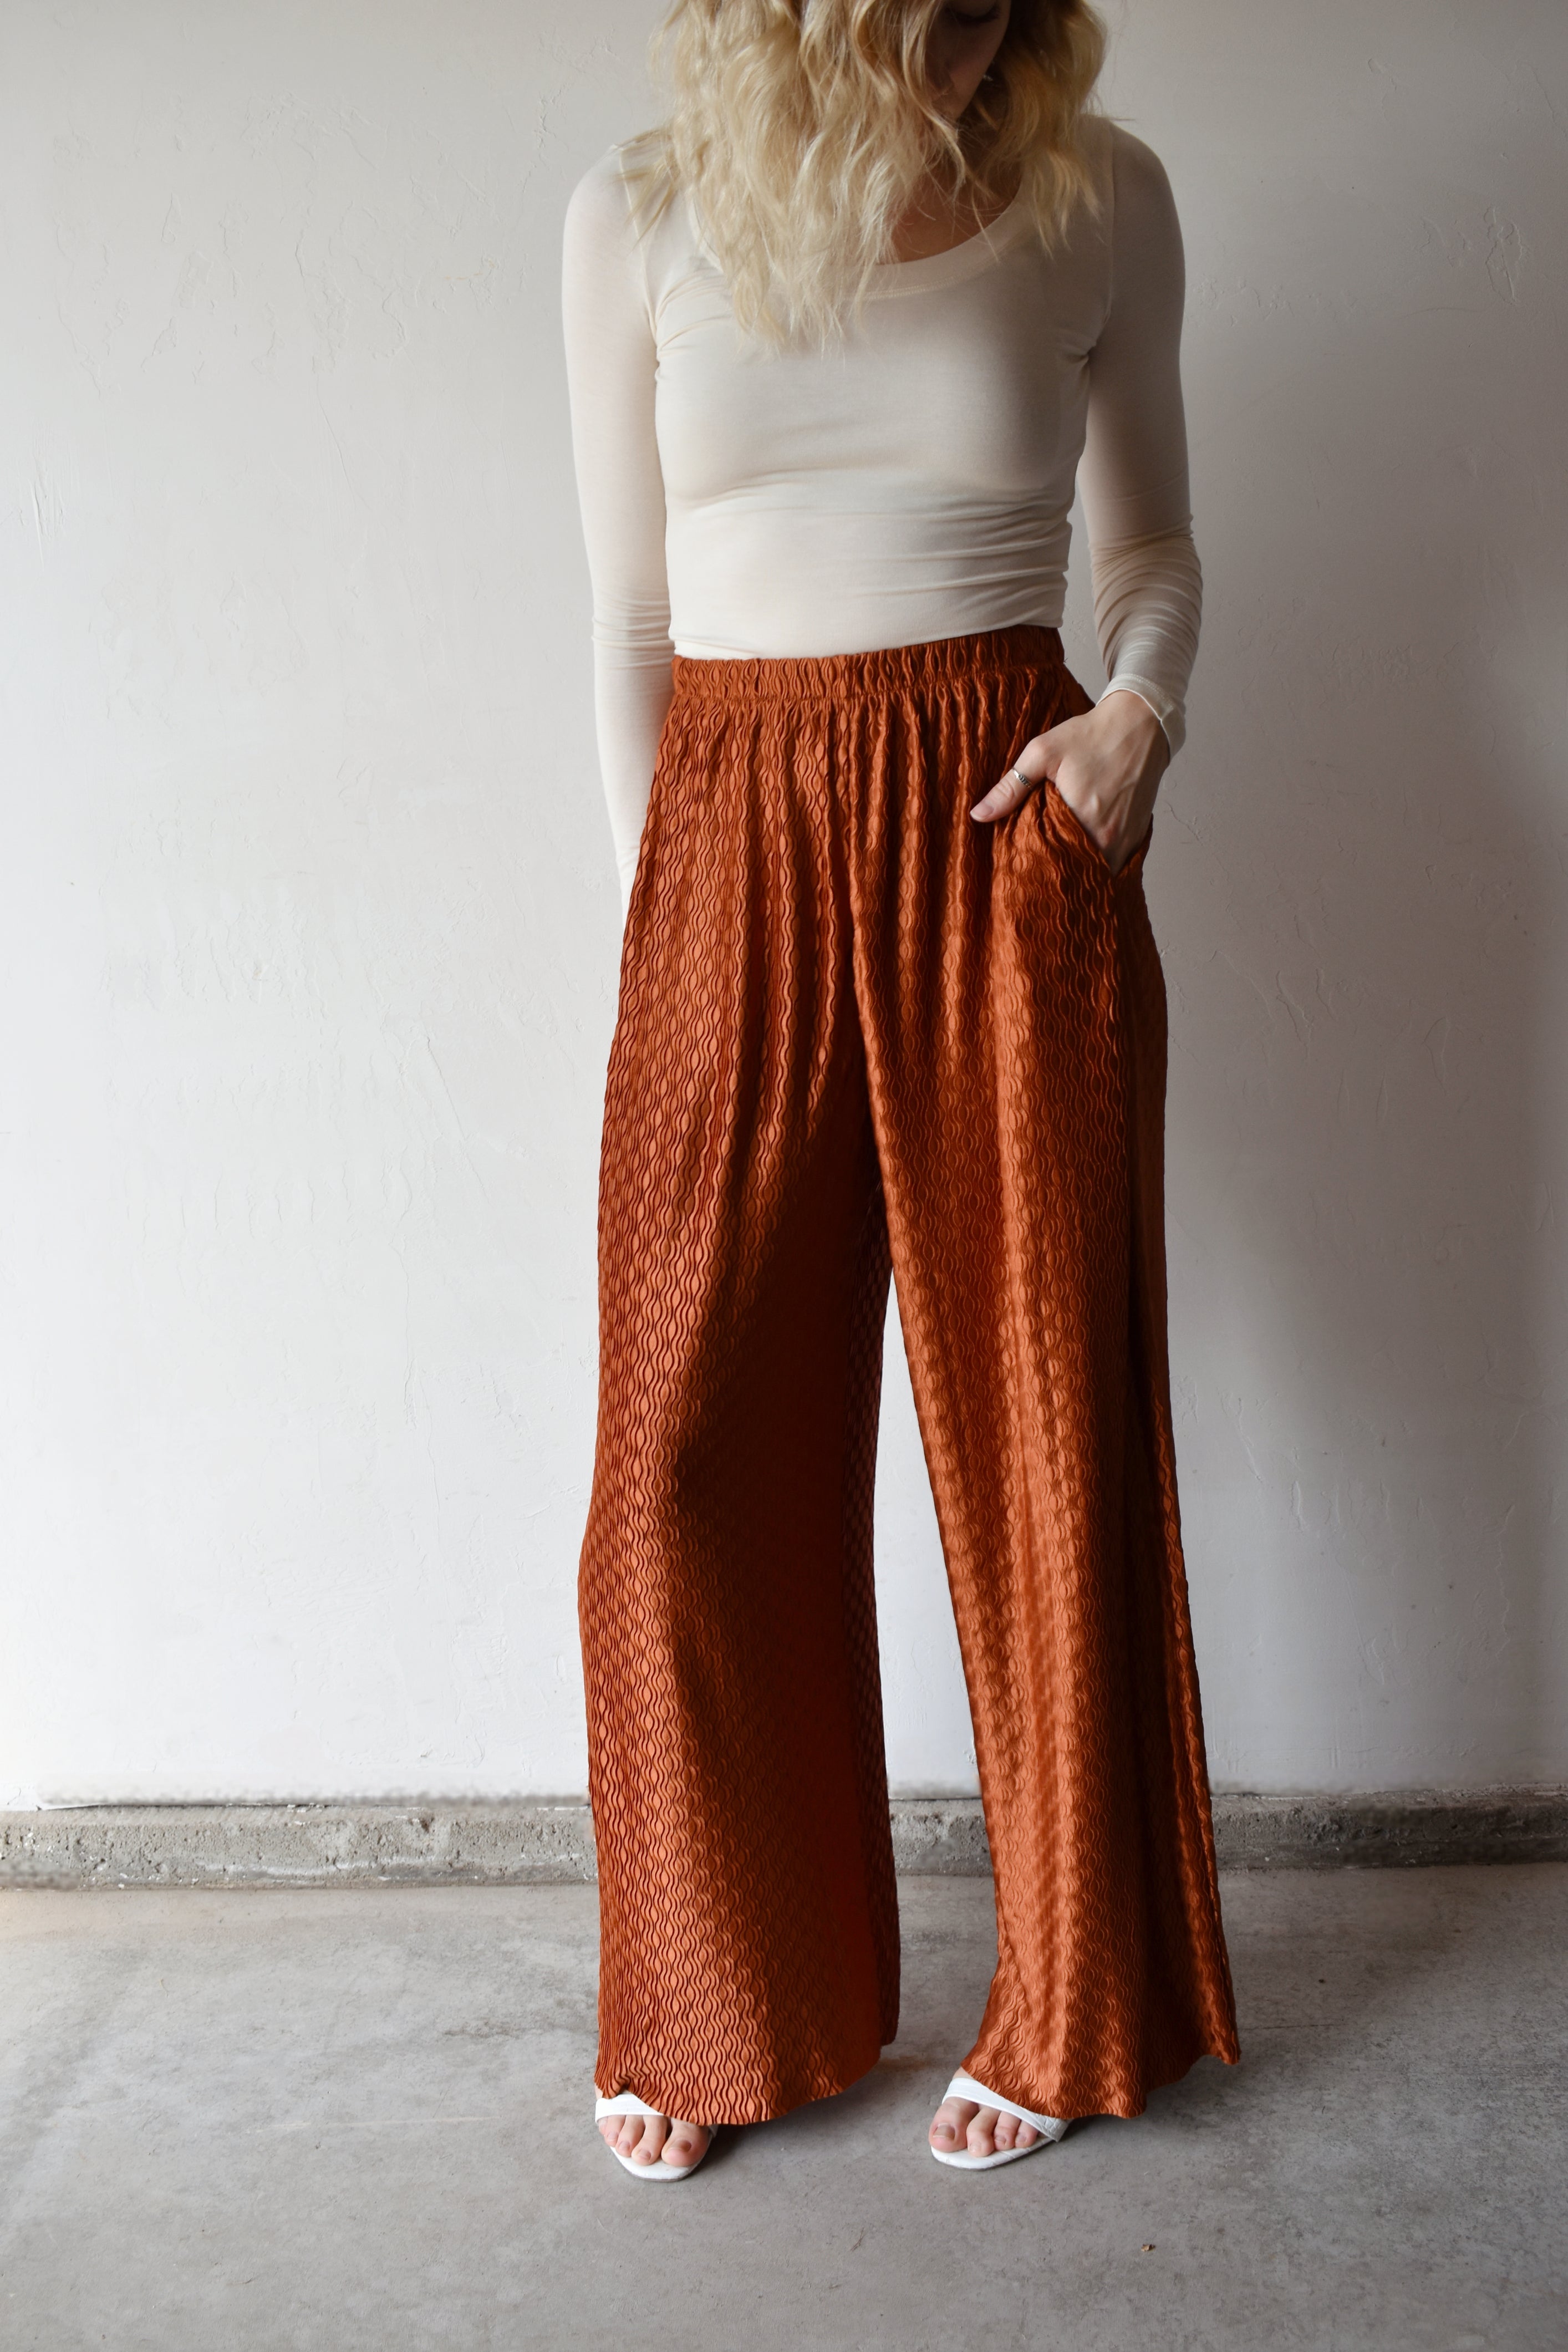 Vintage inspired clothing by Beatrice Winter — Extreme high waist trousers